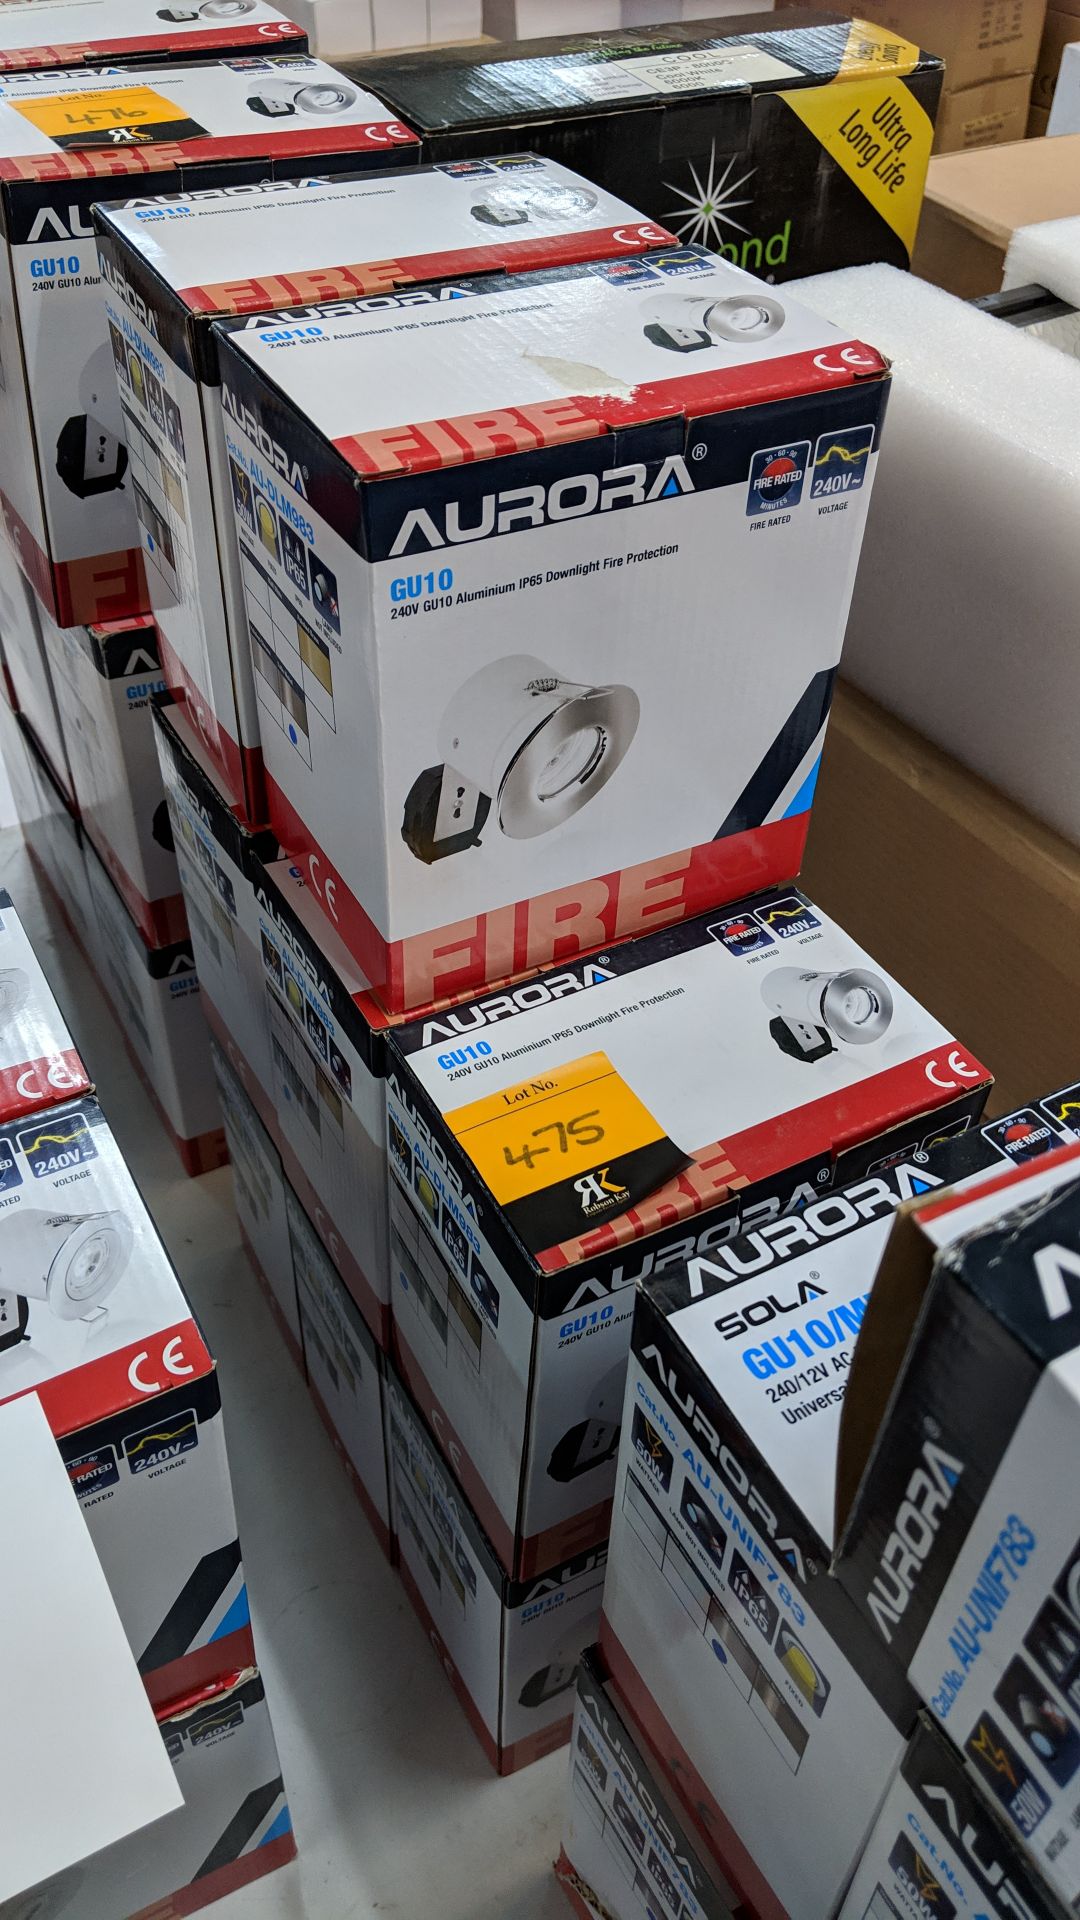 8 off Aurora GU10 240V aluminium IP65 fire protection downlights This lot is one of a number of lots